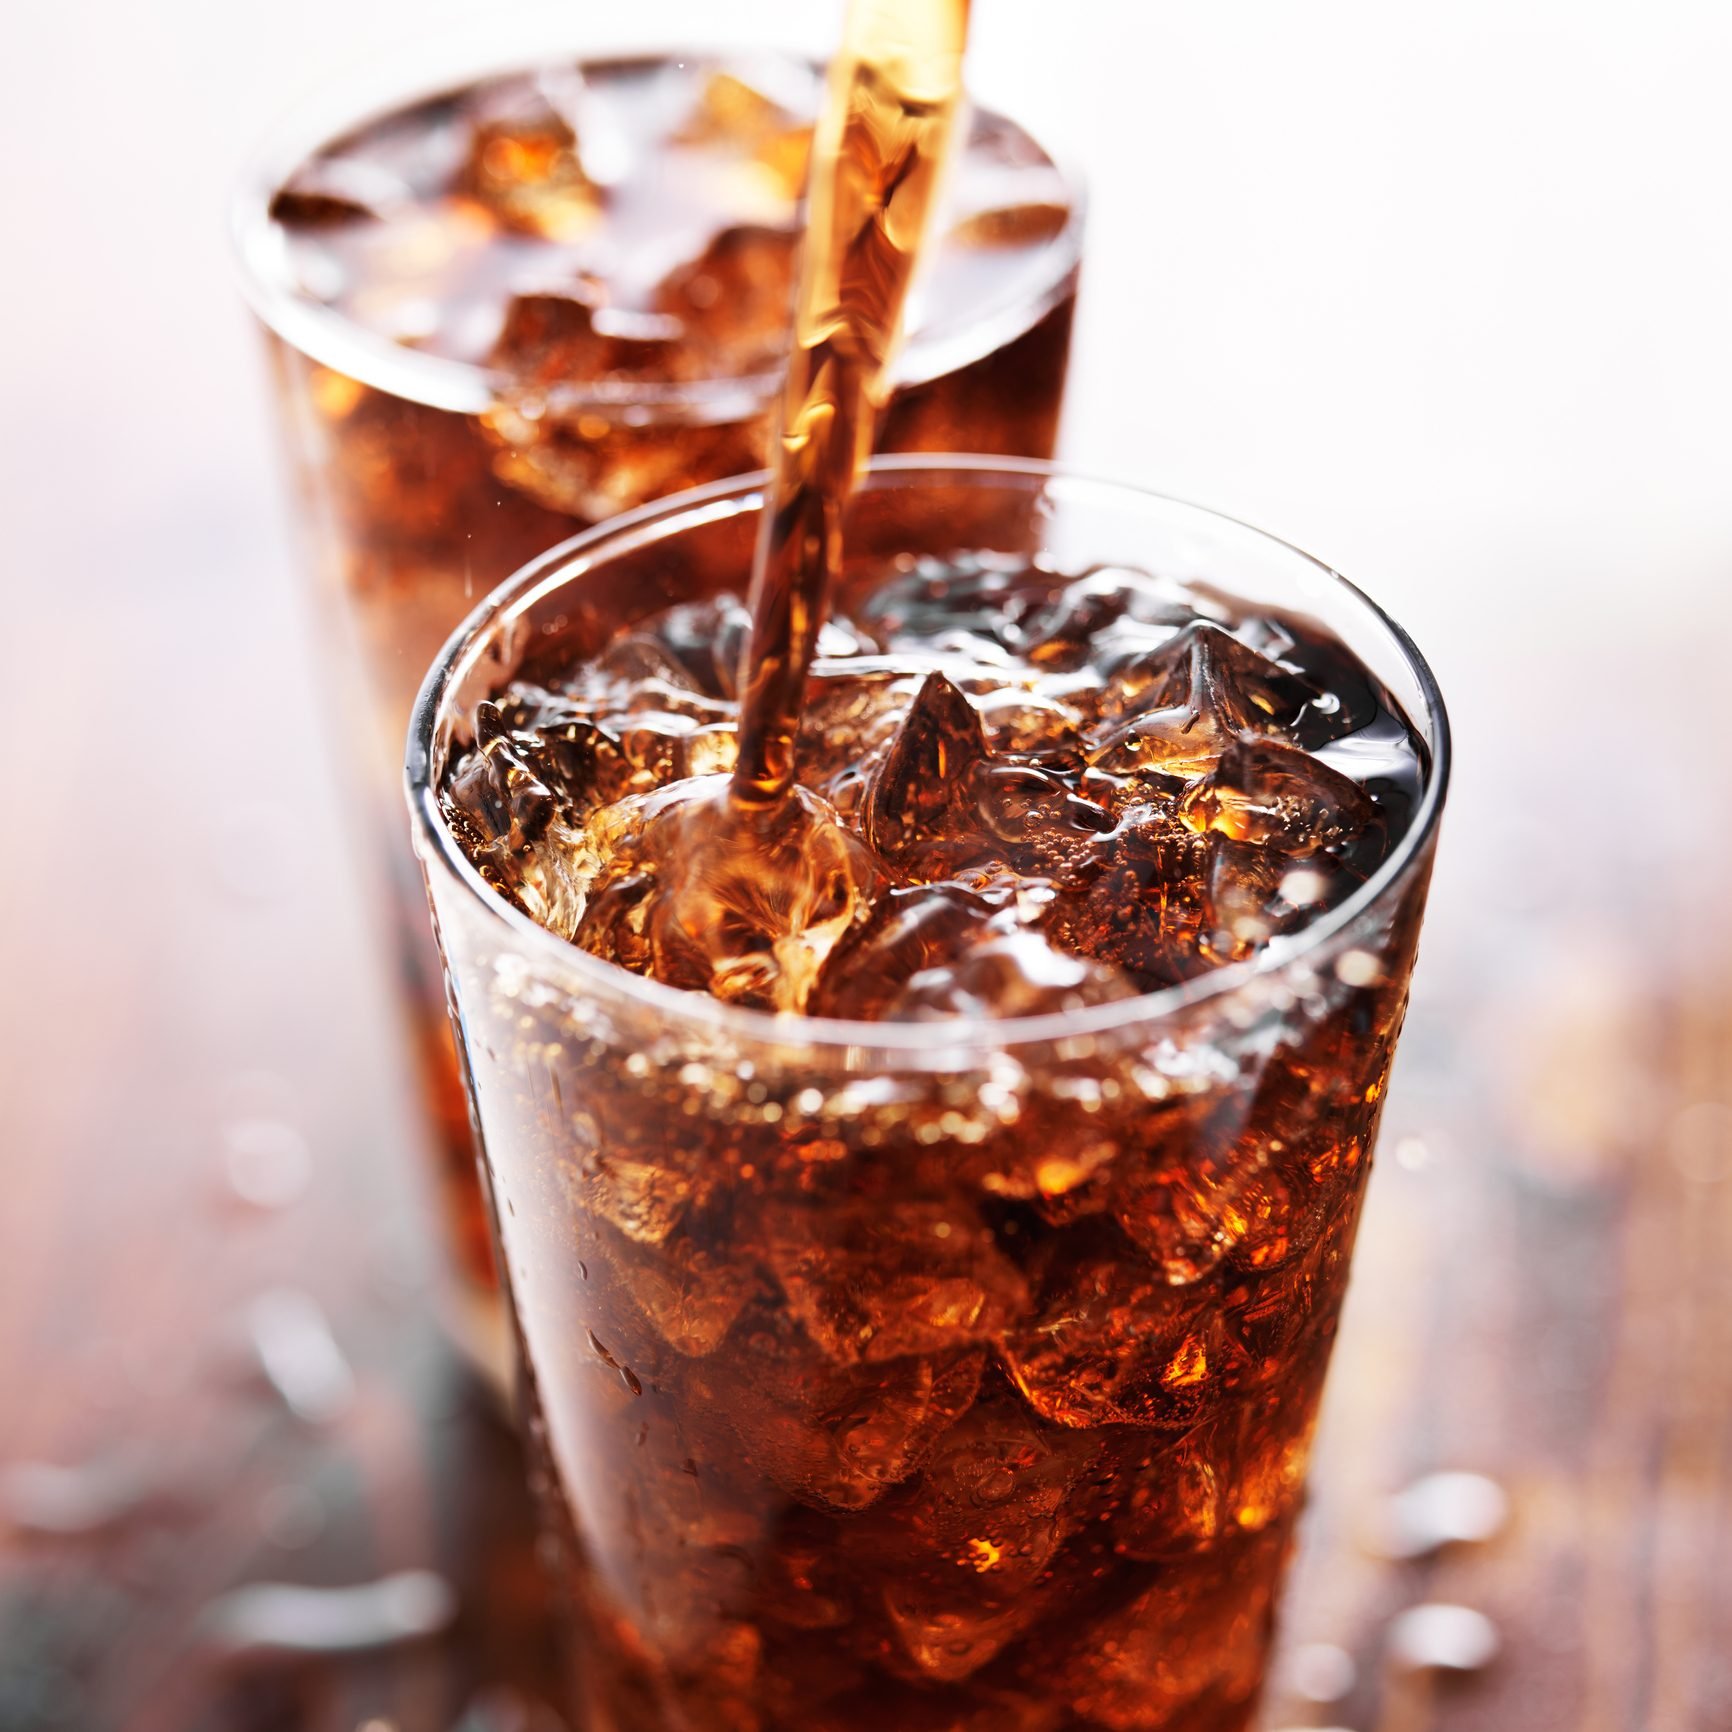 Can You Drink Diet Soda While Intermittent Fasting?